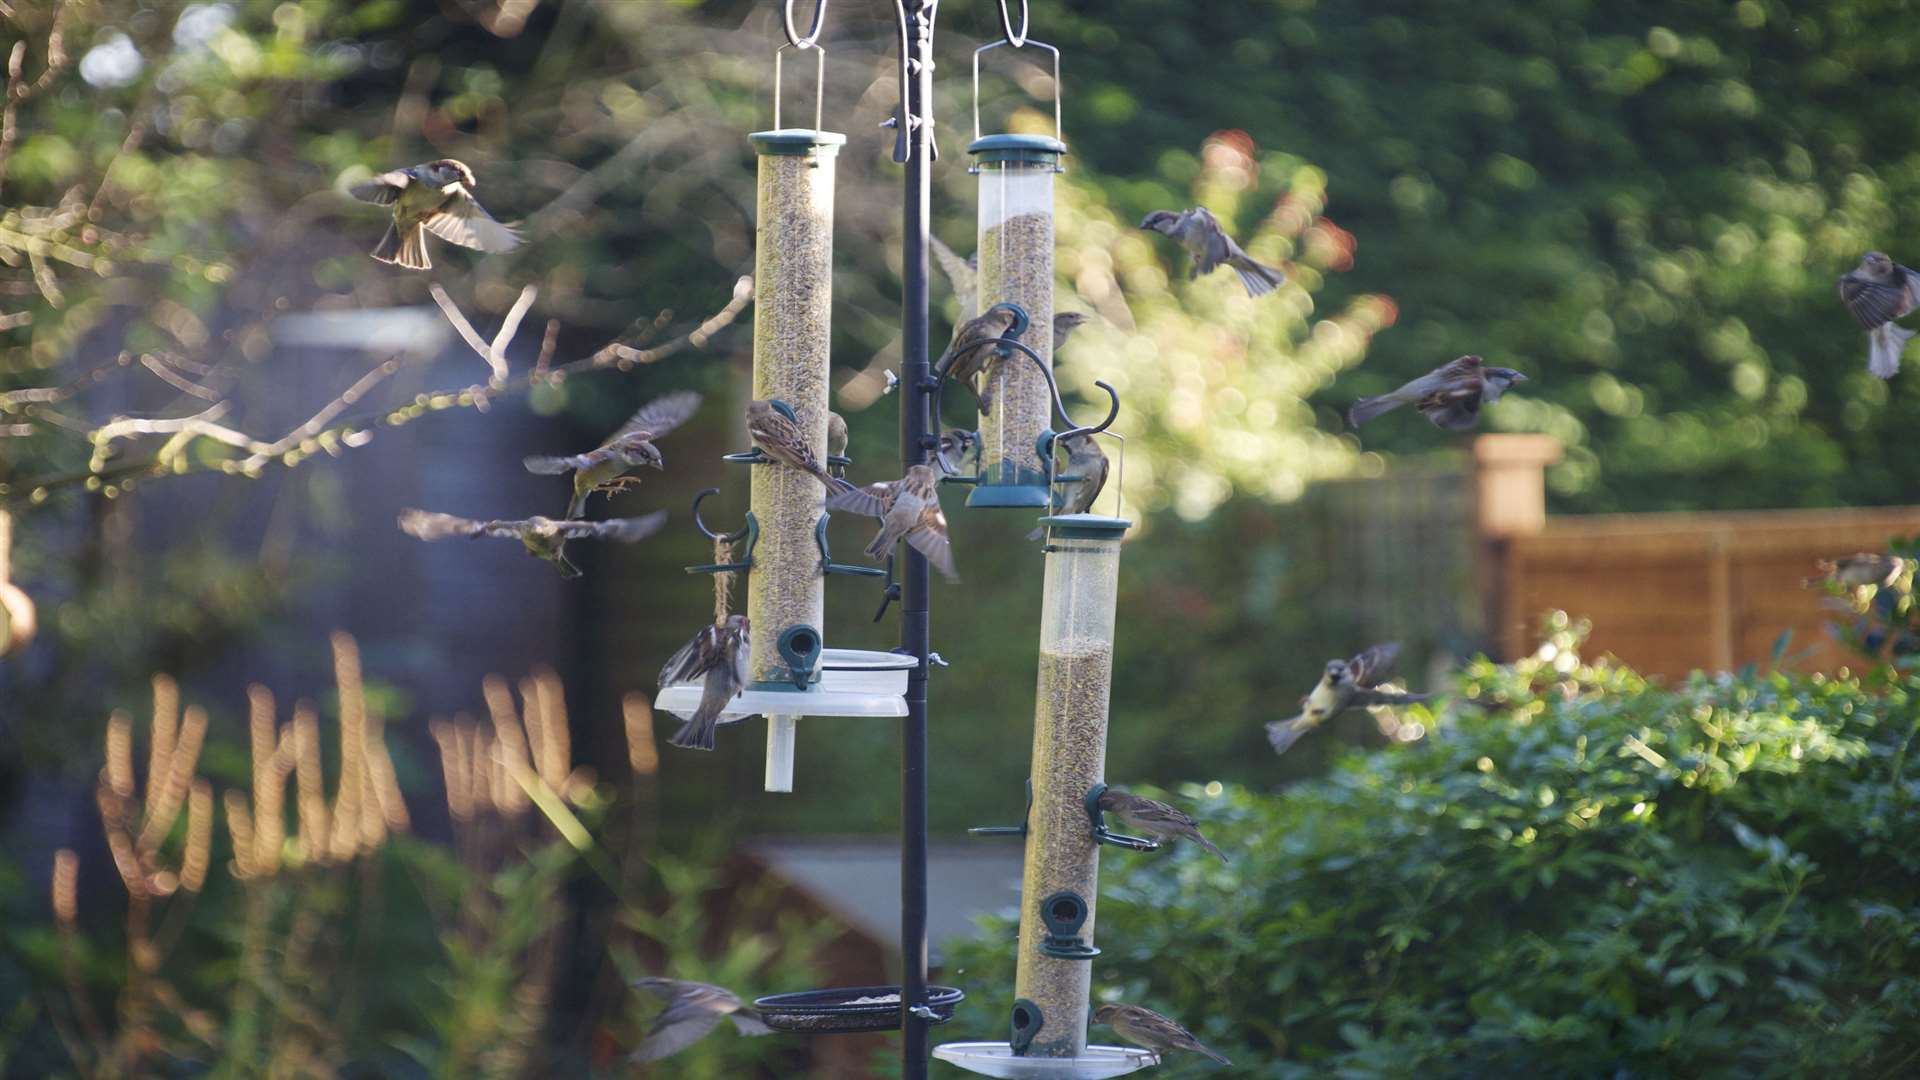 It's time to once again fill up your feeders and register for the Big Garden Birdwatch